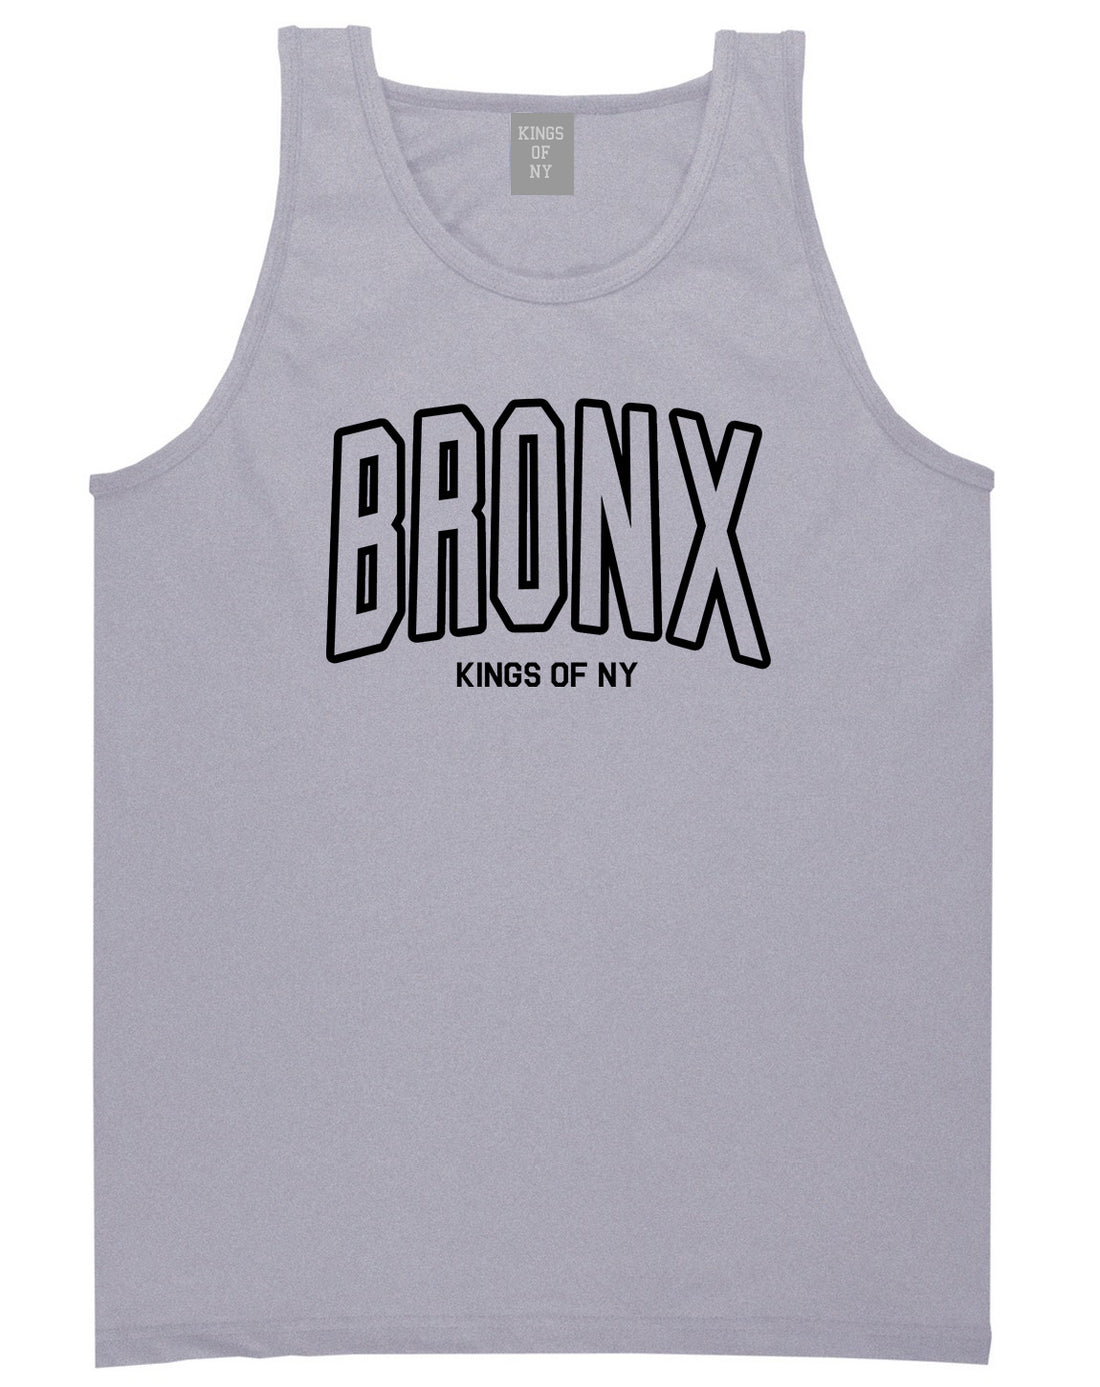 BRONX College Outline Mens Tank Top Shirt Grey by Kings Of NY